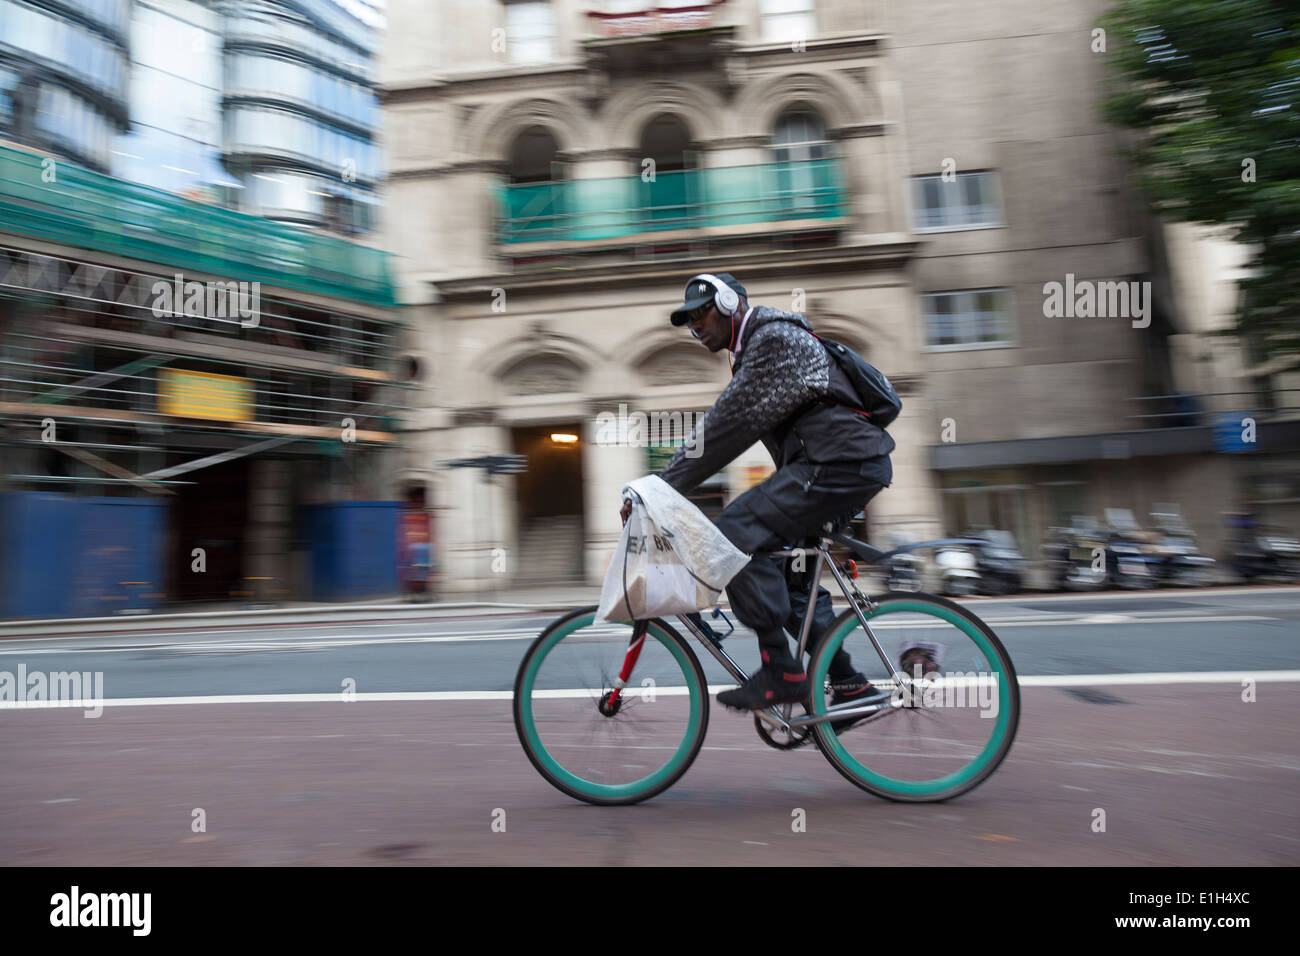 Man wearing headphones over his baseball cap, rides a bicycle with bright  blue wheels along a London street Stock Photo - Alamy